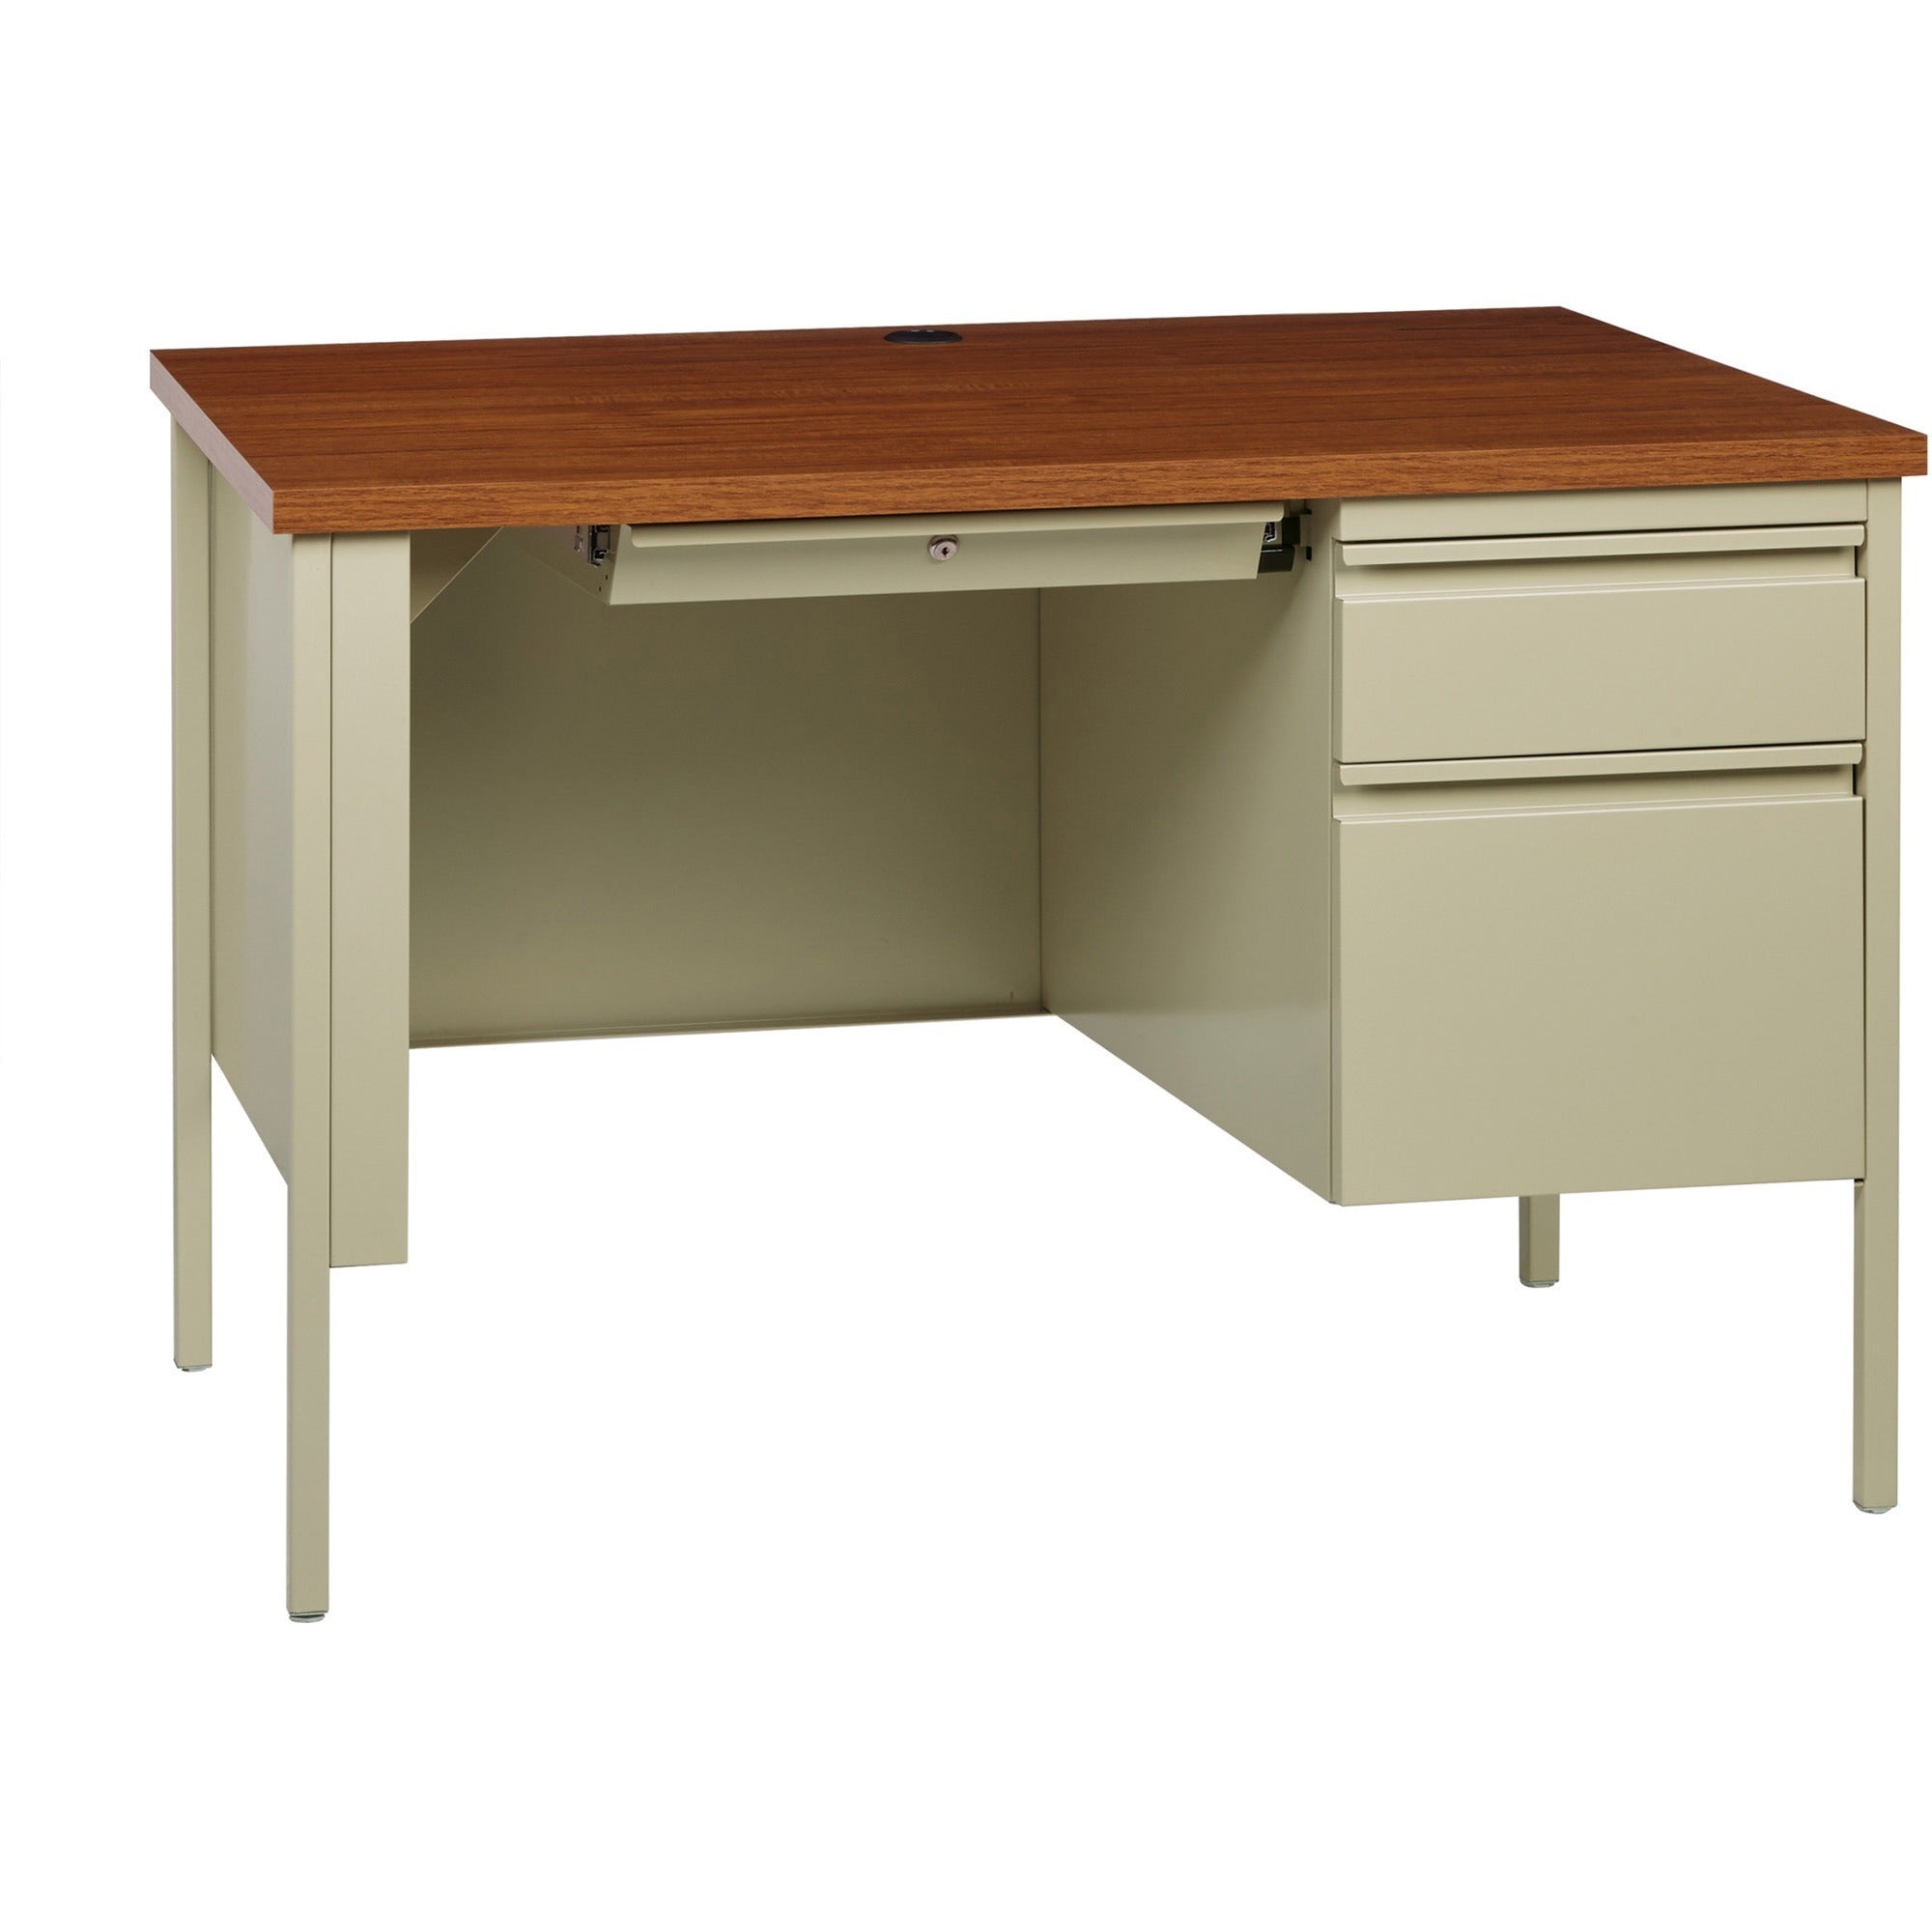 lorell-fortress-series-45-1-2-right-single-pedestal-desk-455-x-24295--11-table-top-box-file-drawers-single-pedestal-on-right-side-square-edge_llr66947 - 1